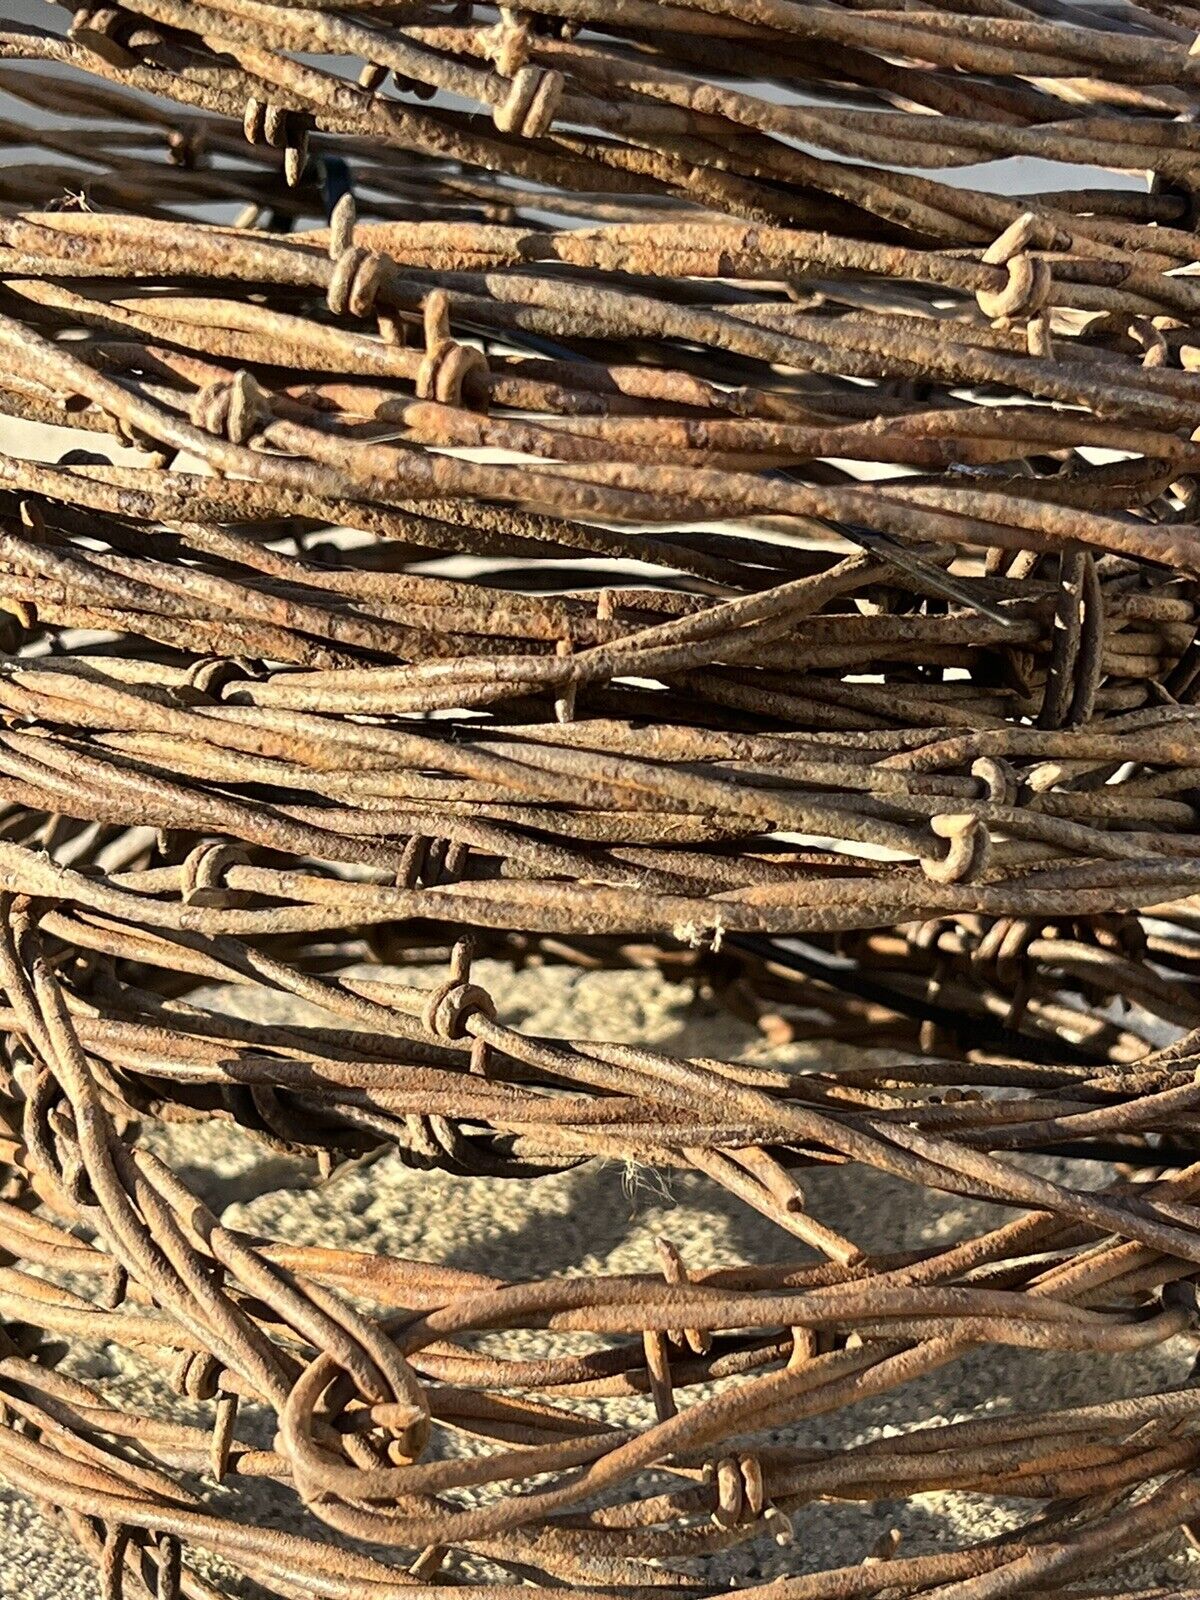 25 Feet Rusty Barbwire. Authentic Rusty Farm Barbwire. Rustic Crafting Décor